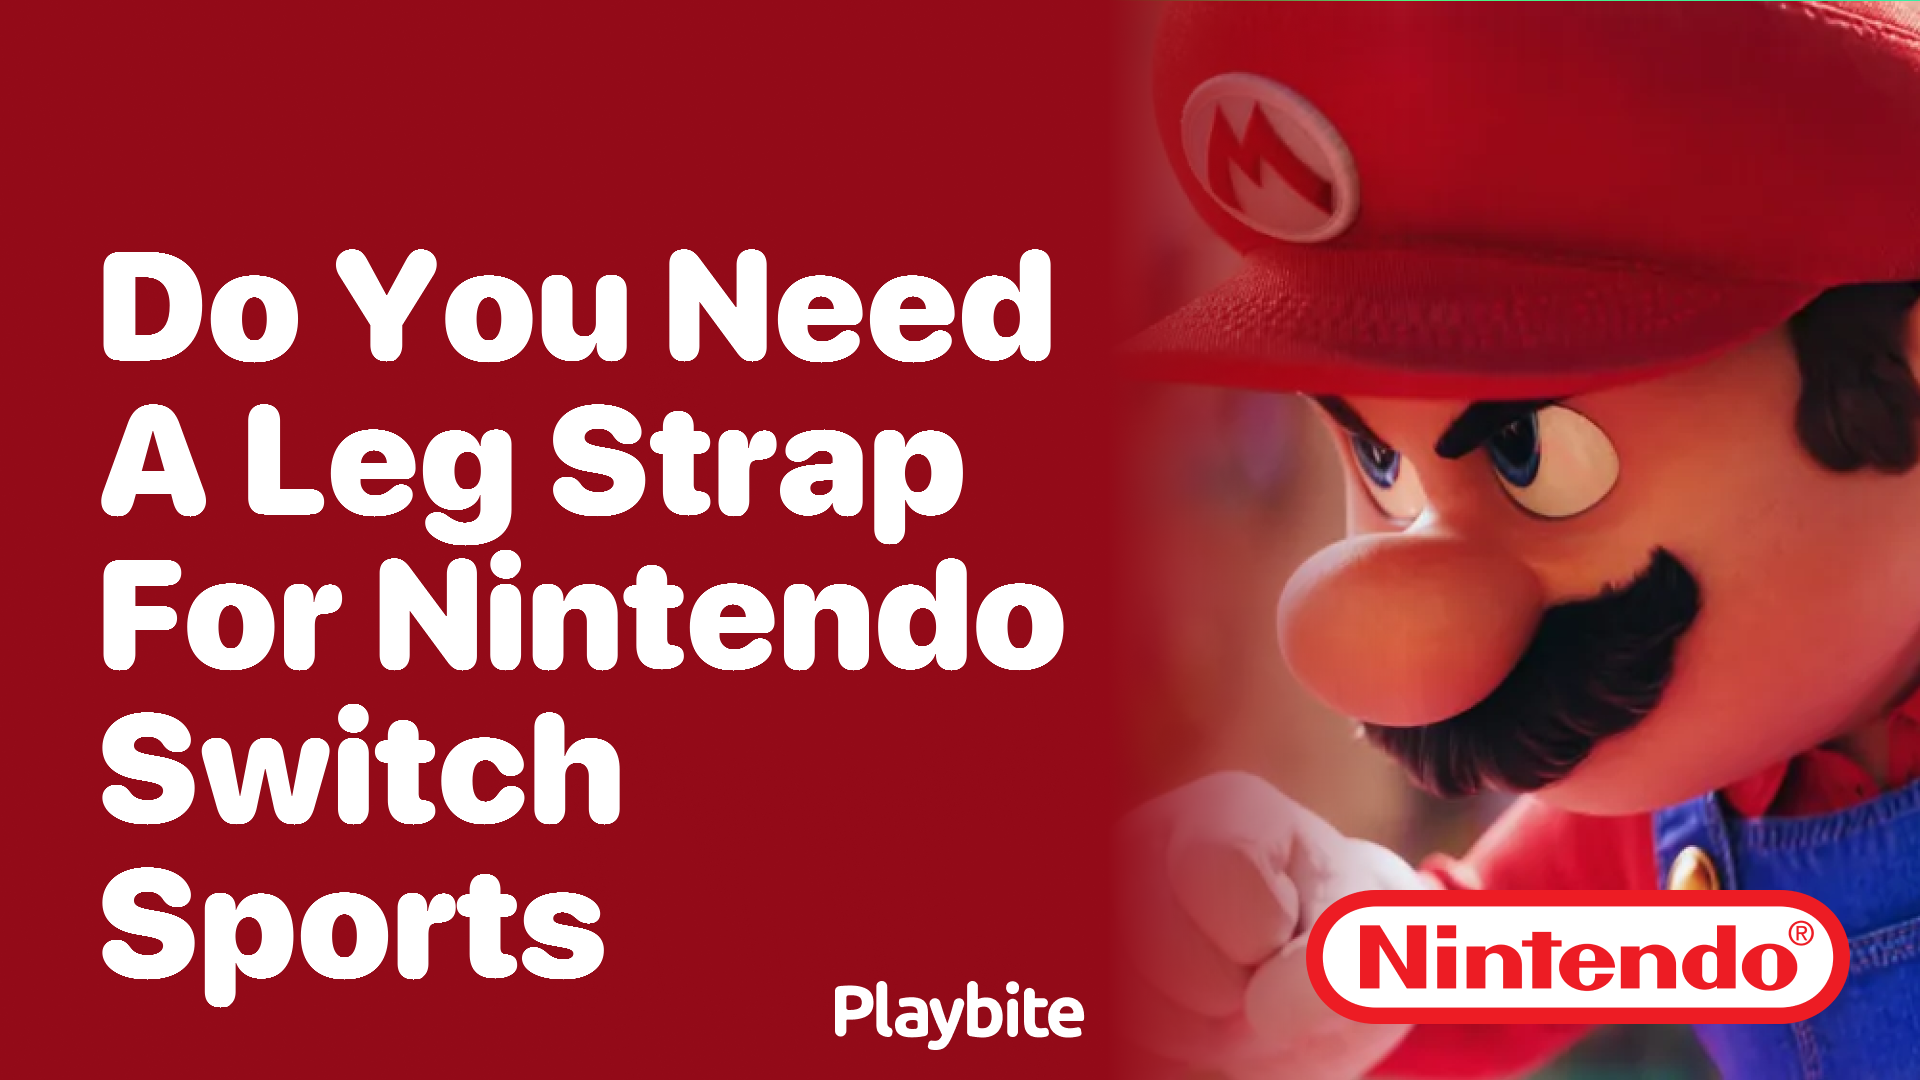 Do You Need a Leg Strap for Nintendo Switch Sports? - Playbite